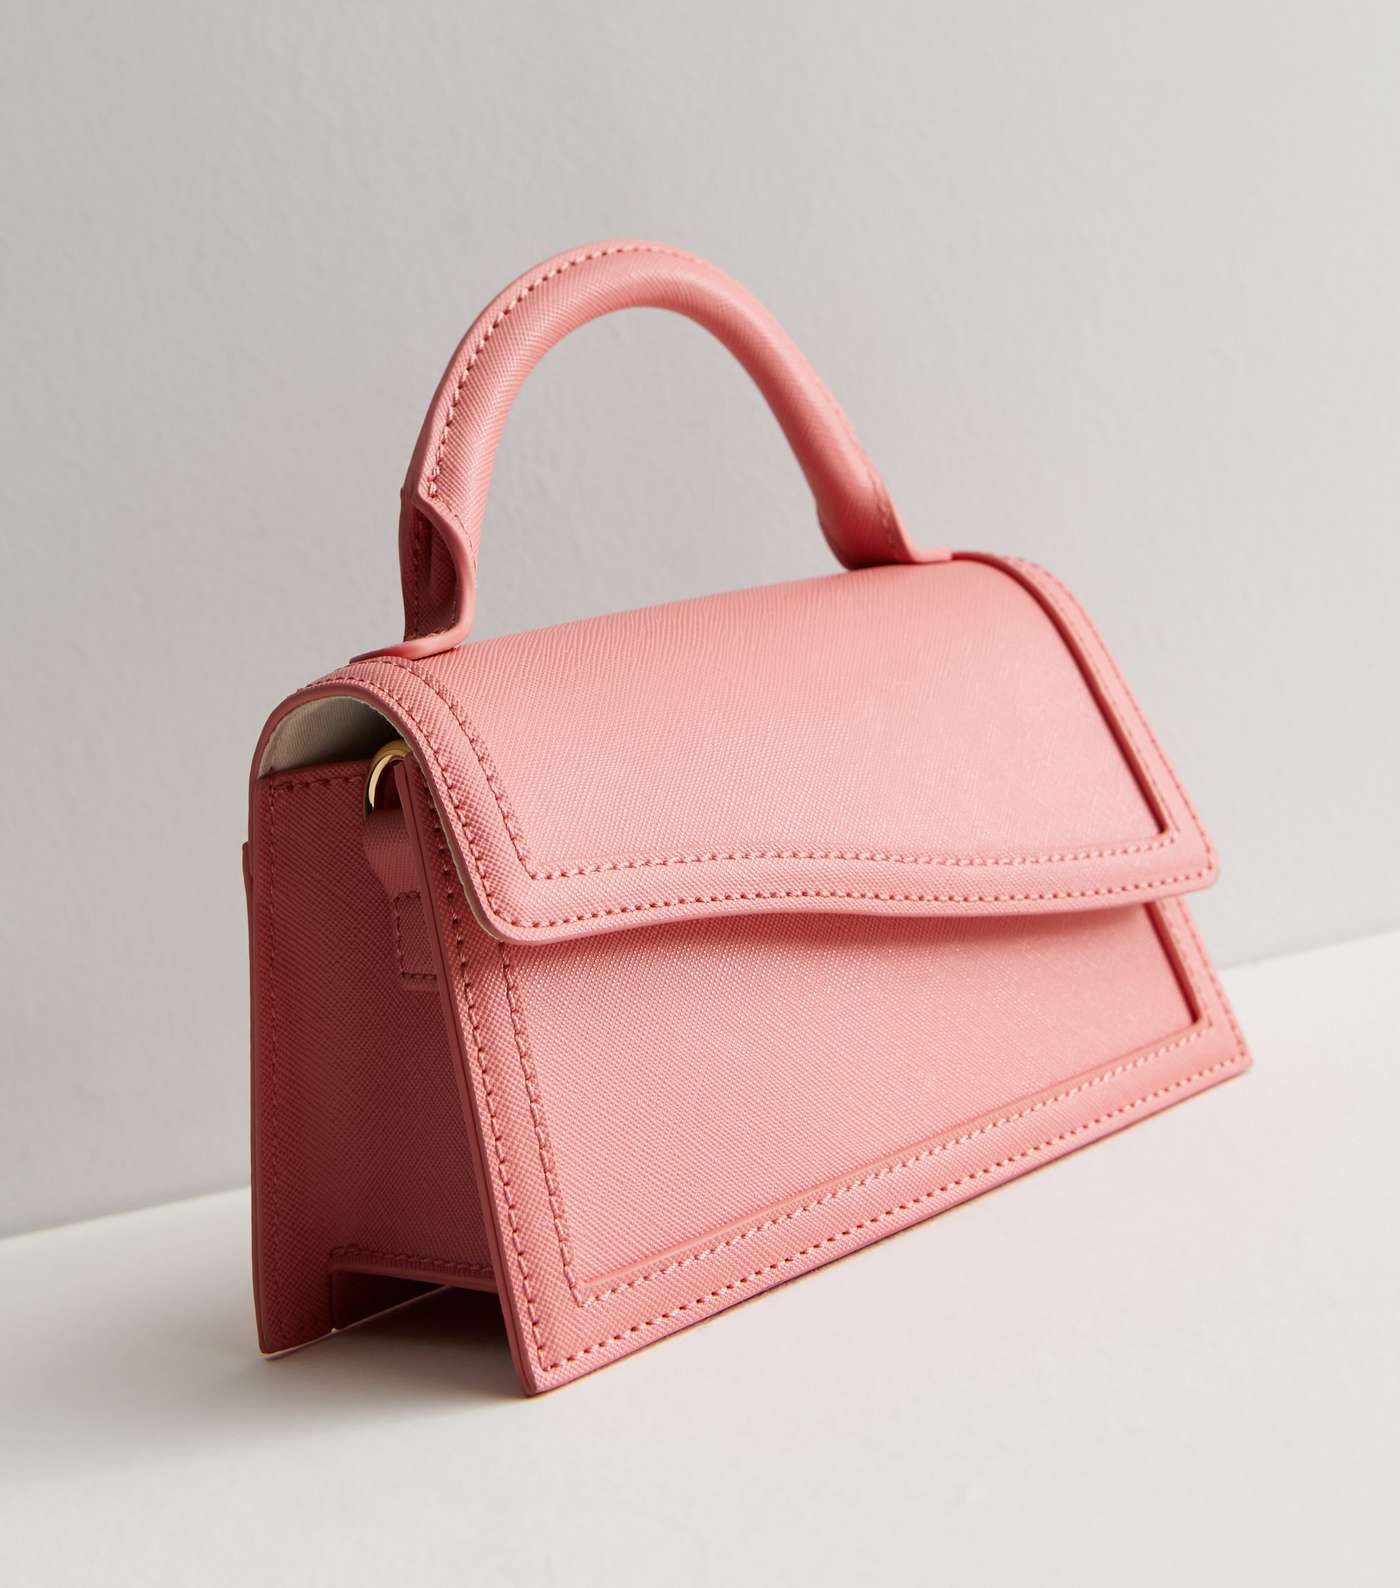 Coral Leather-Look Asymmetric Top Handle Bag Image 3